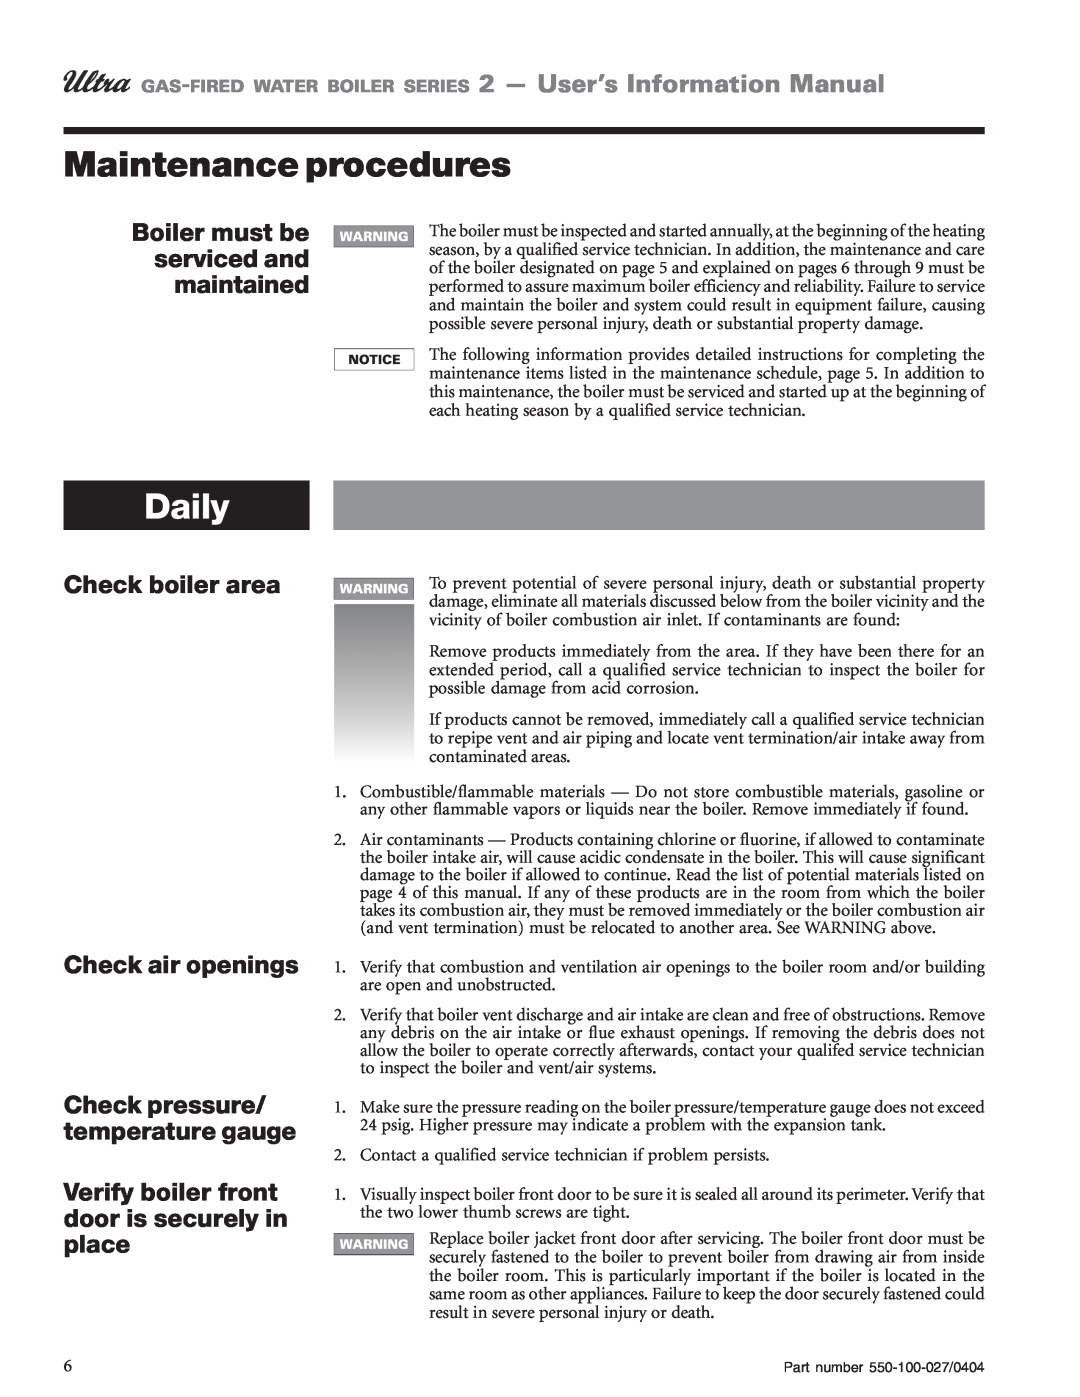 Weil-McLain Series 2 manual Maintenance procedures, Daily, Boiler must be serviced and maintained 